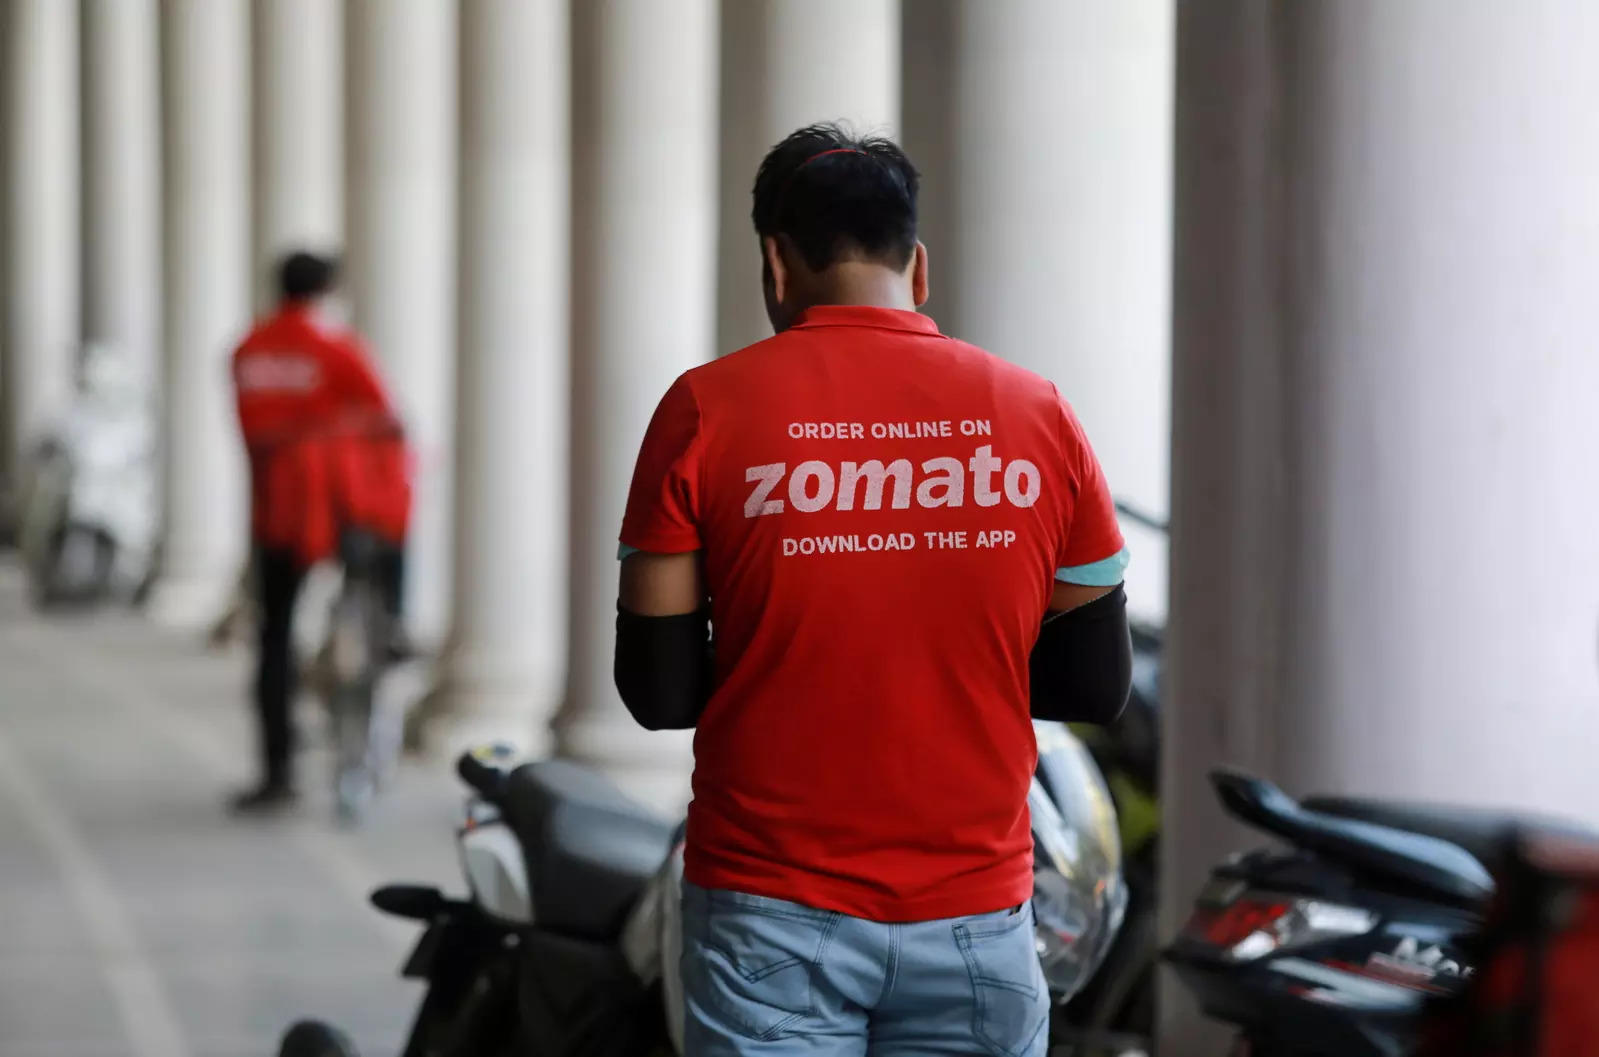 FILE PHOTO: A delivery worker of Zomato, an Indian food-delivery startup, waits to collect an order from a restaurant